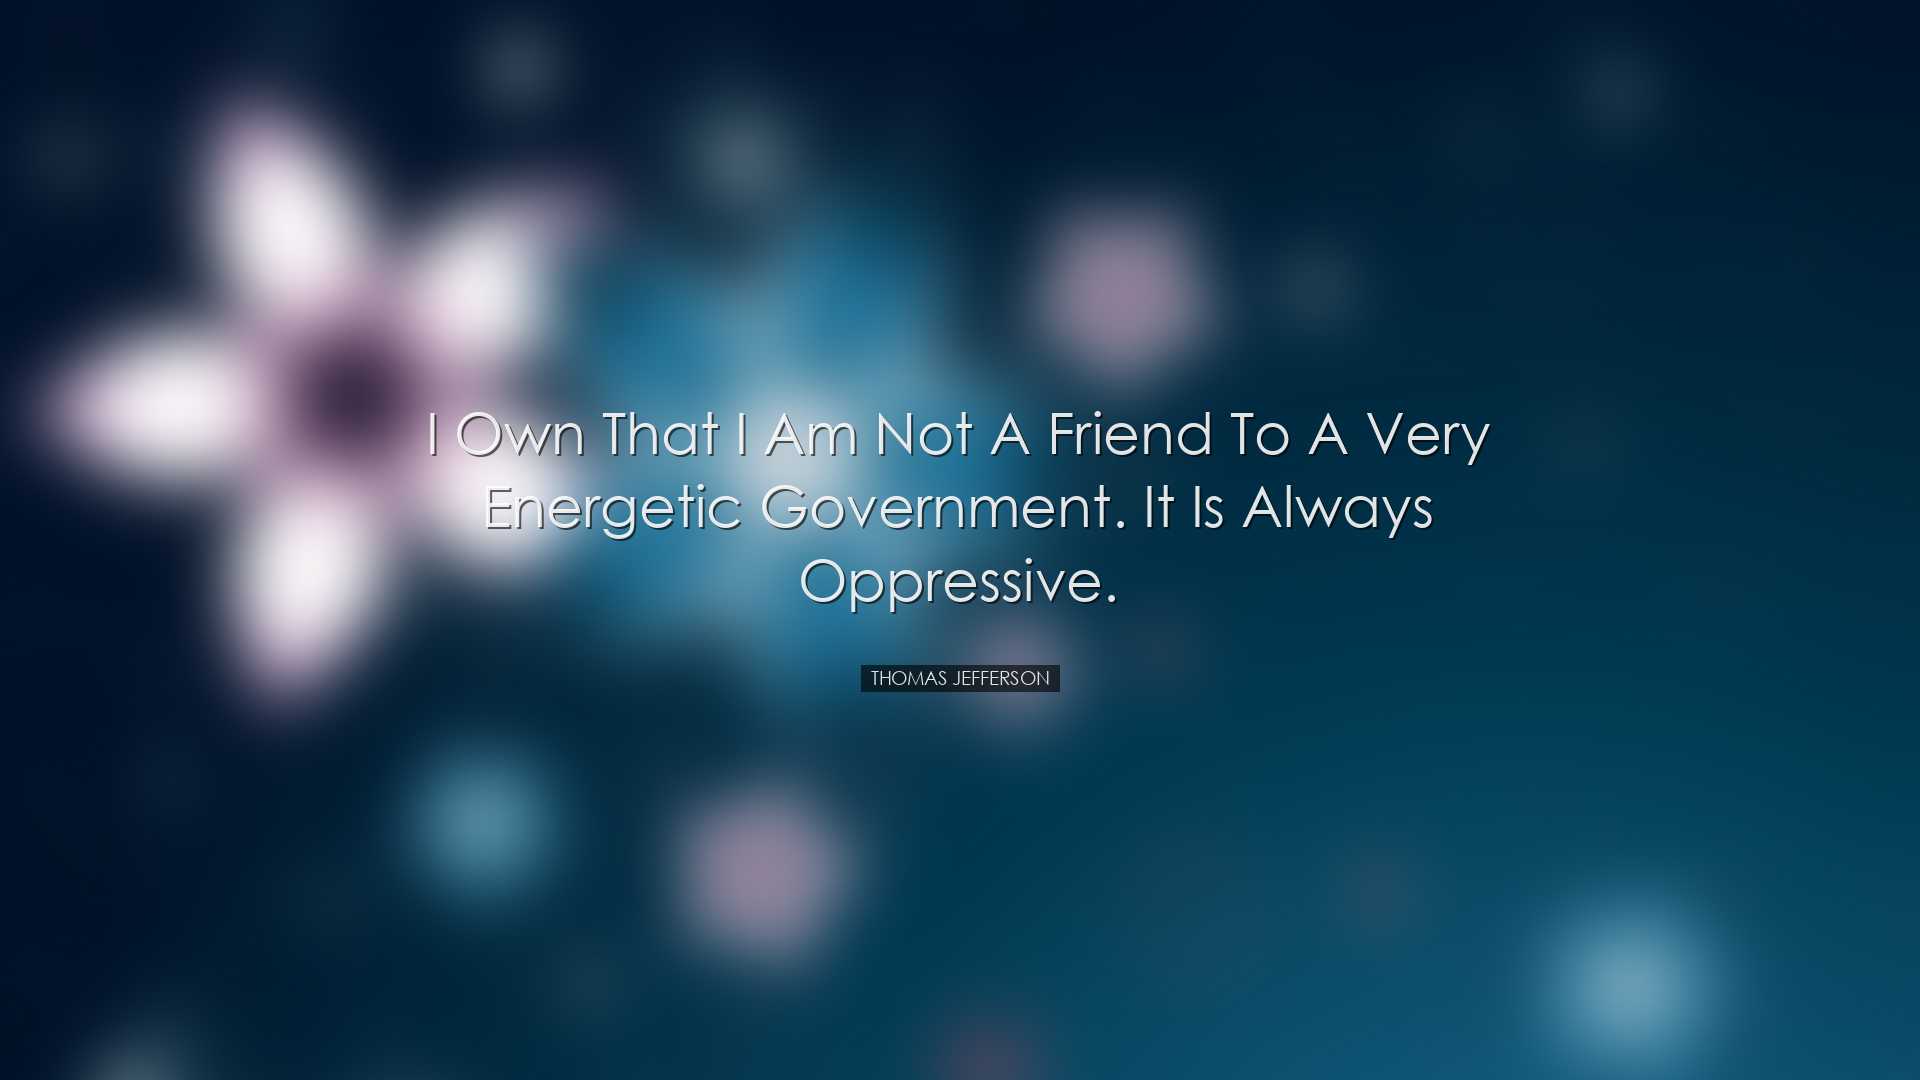 I own that I am not a friend to a very energetic government. It is